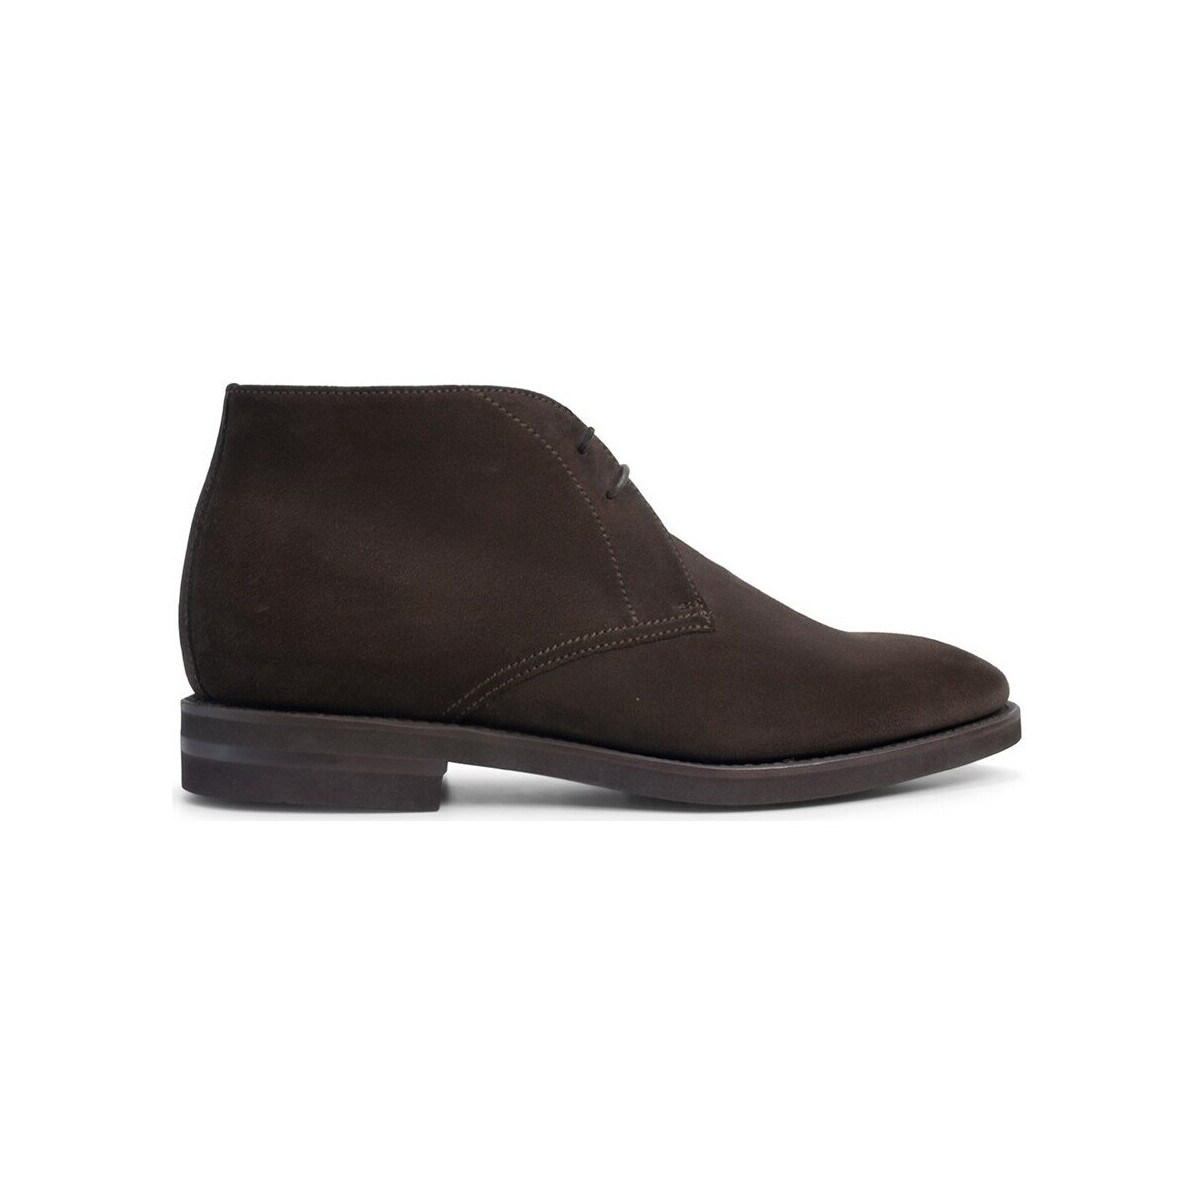 Chaussures Homme Baskets montantes Finsbury Shoes CHUKKA 1986 Marron